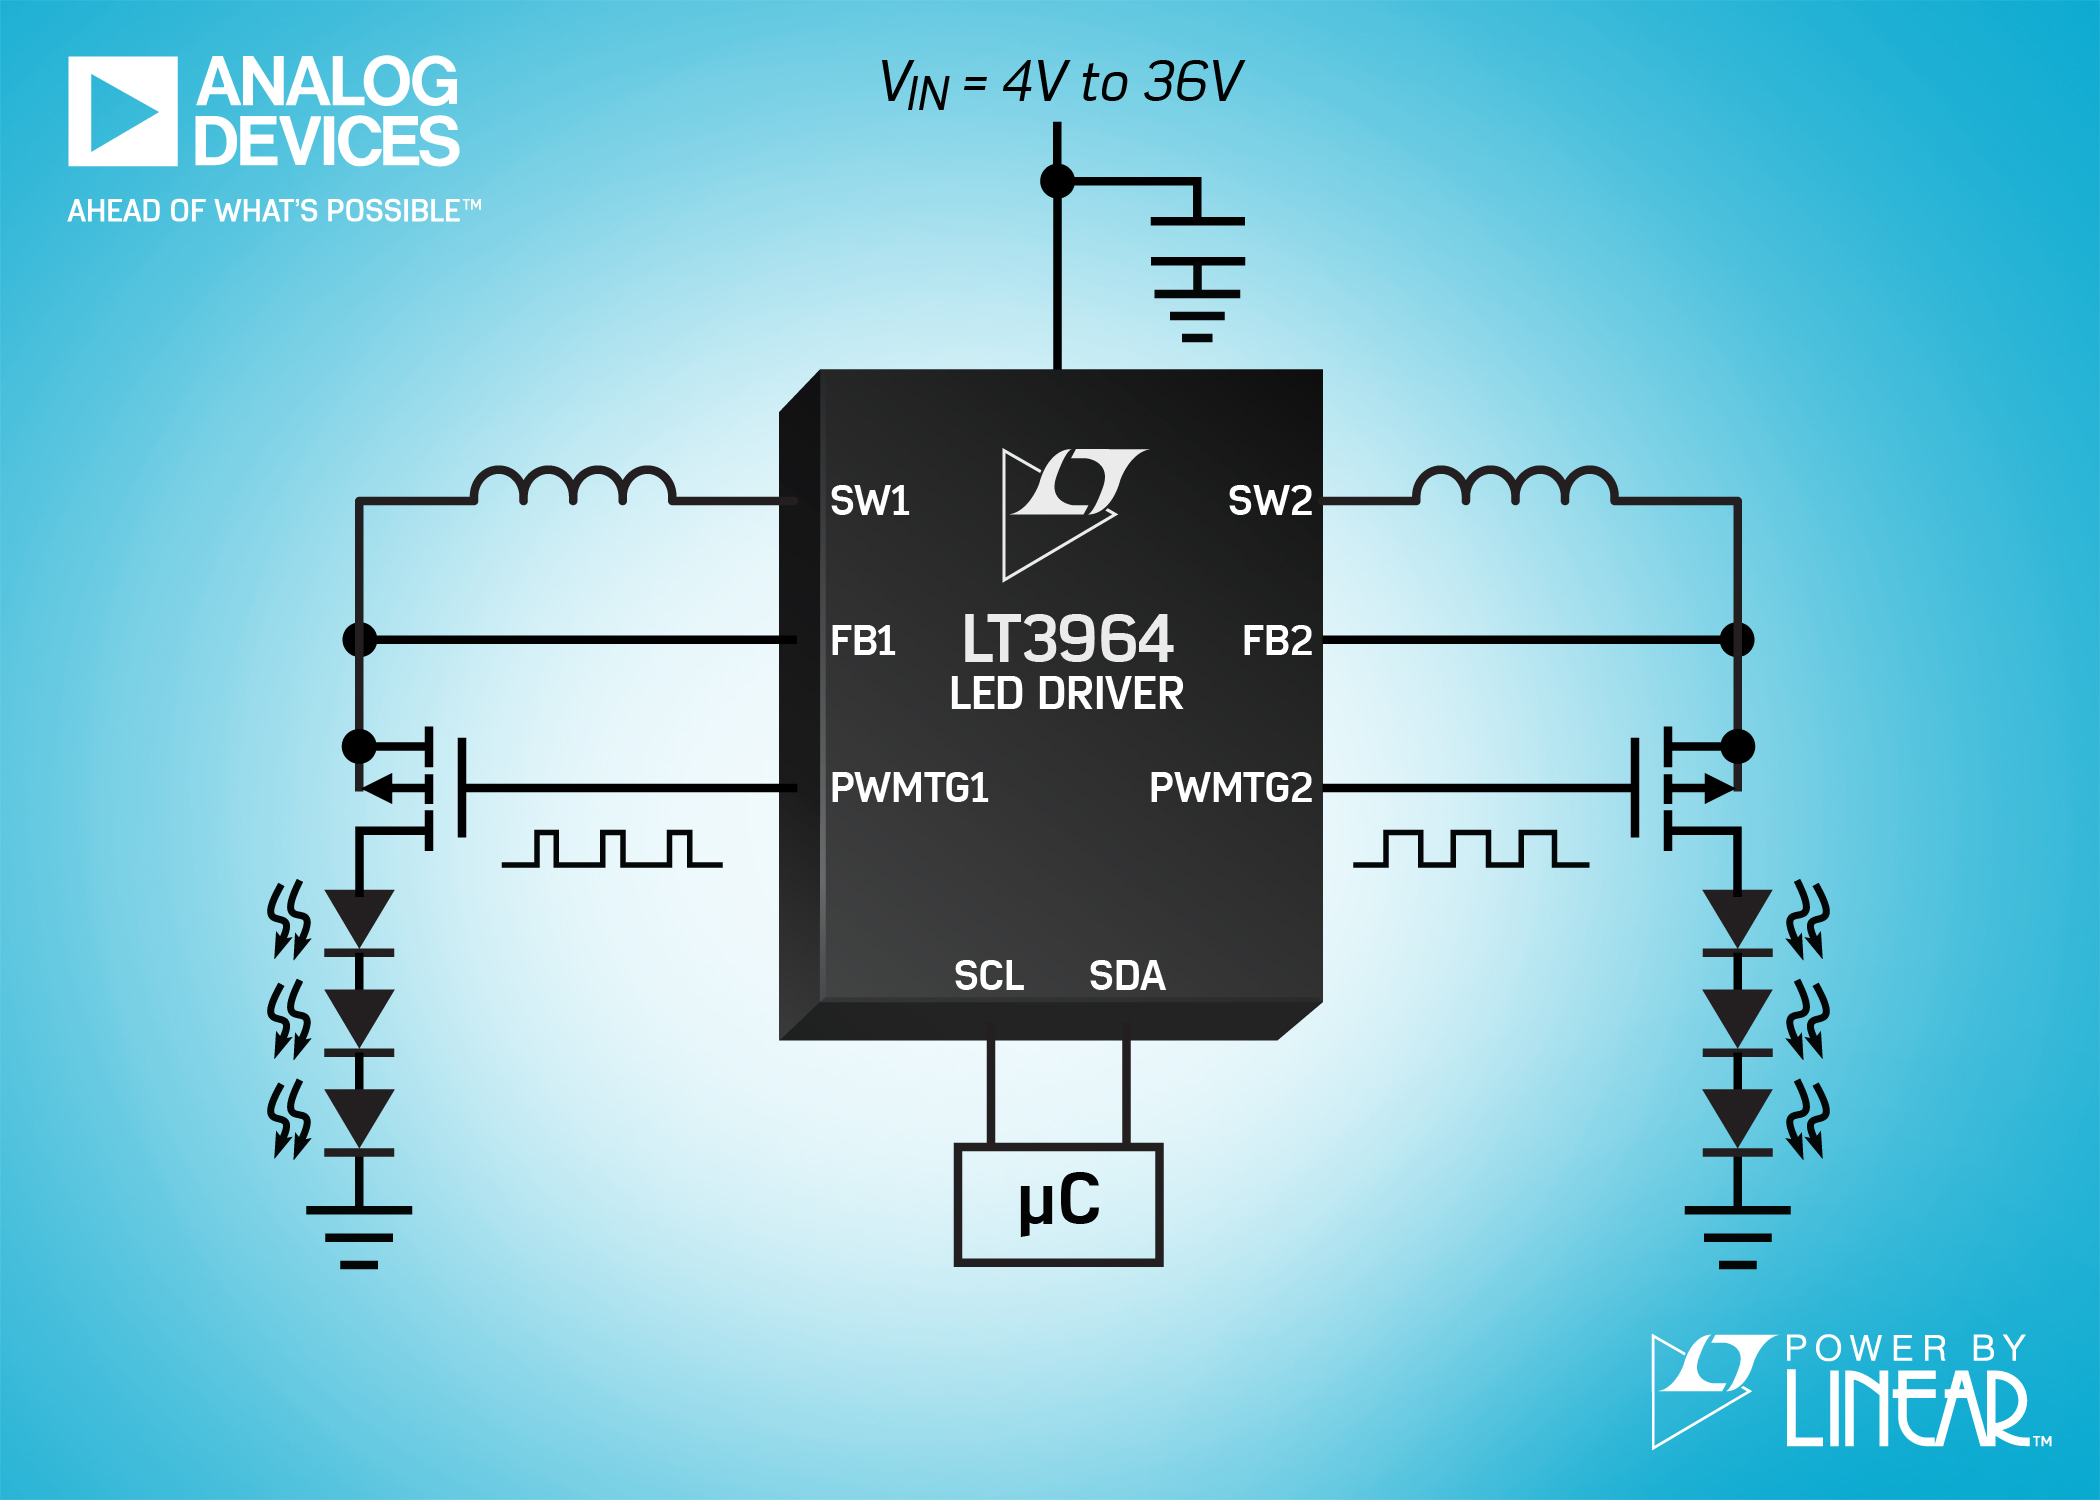 LED driver simplifies dimming control